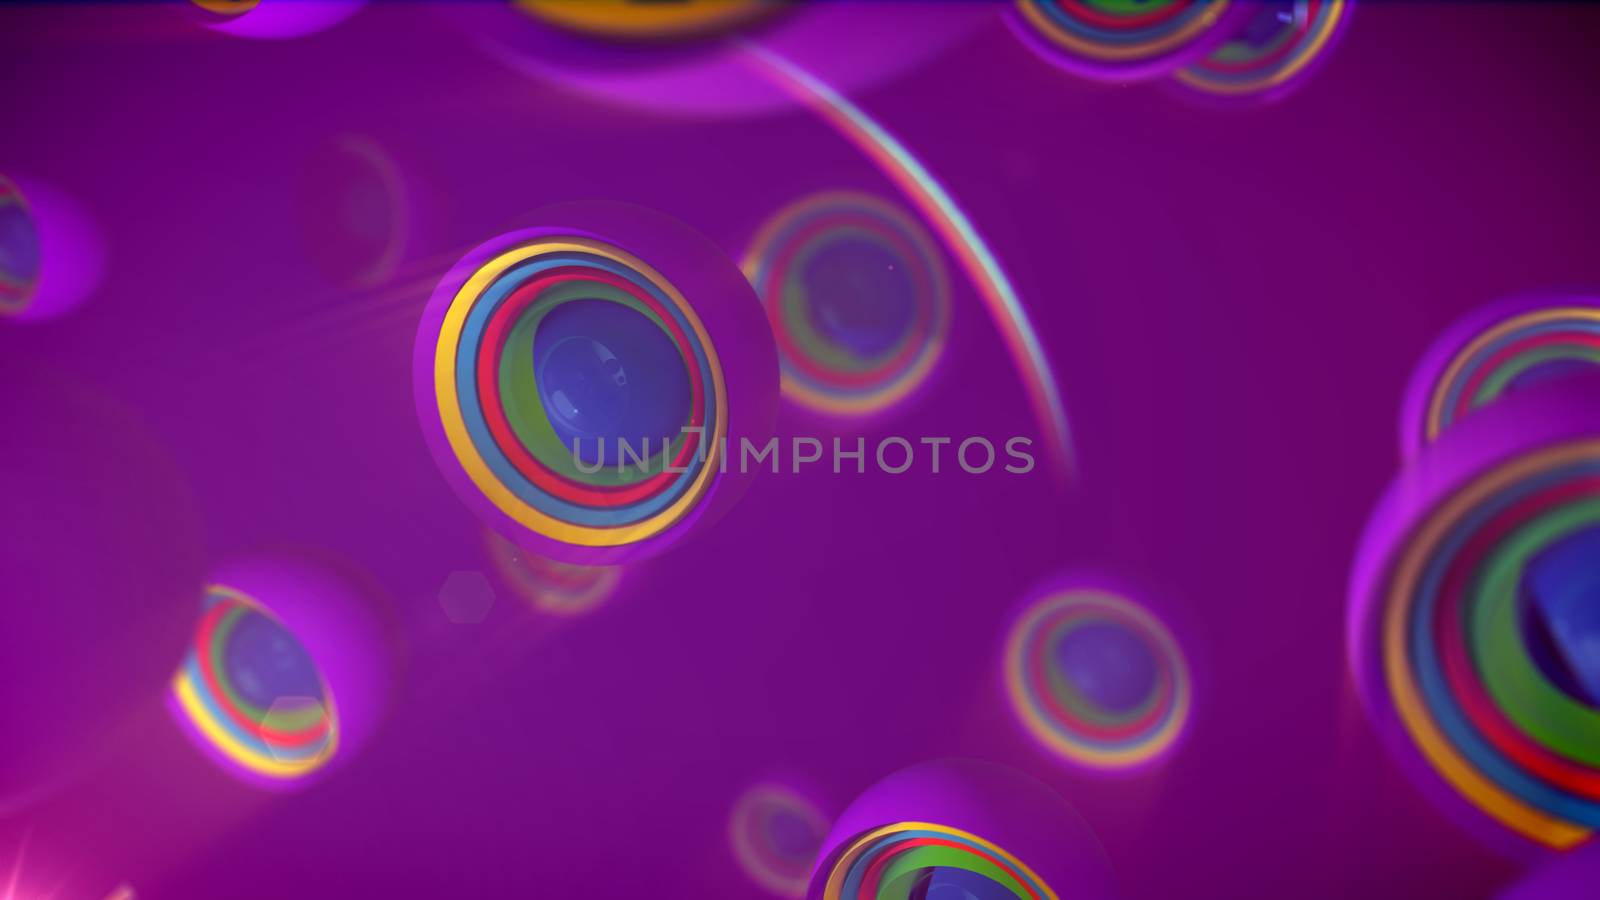 An optimistic 3d illustration of alien looking objects of rainbow colors placed in open semi-spheres with splits in the violet backdrop. They create the mood of optimism, enigma and joy.